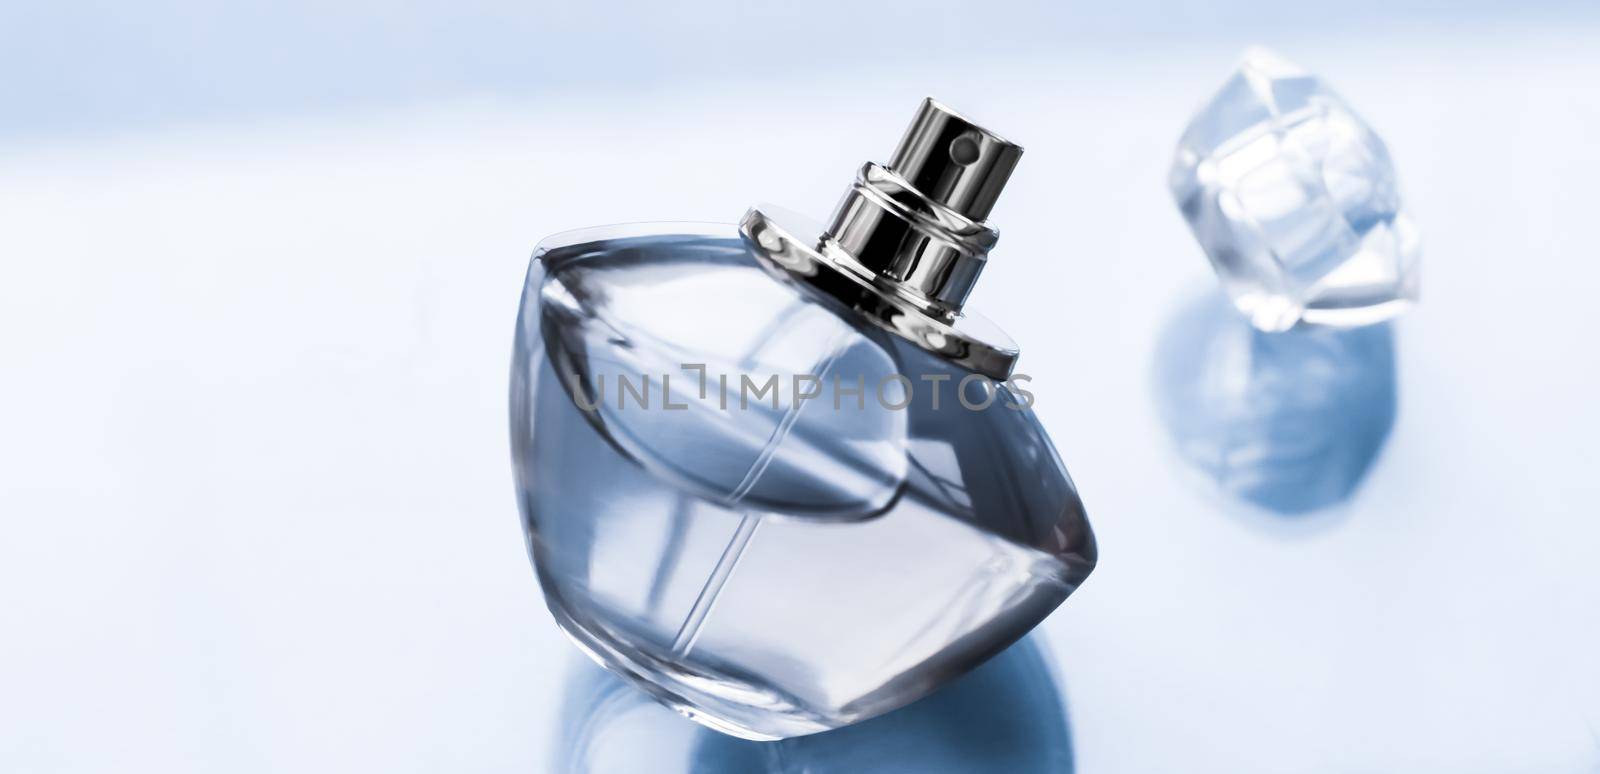 Perfumery, spa and branding concept - Blue perfume bottle on glossy background, sweet floral scent, glamour fragrance and eau de parfum as holiday gift and luxury beauty cosmetics brand design